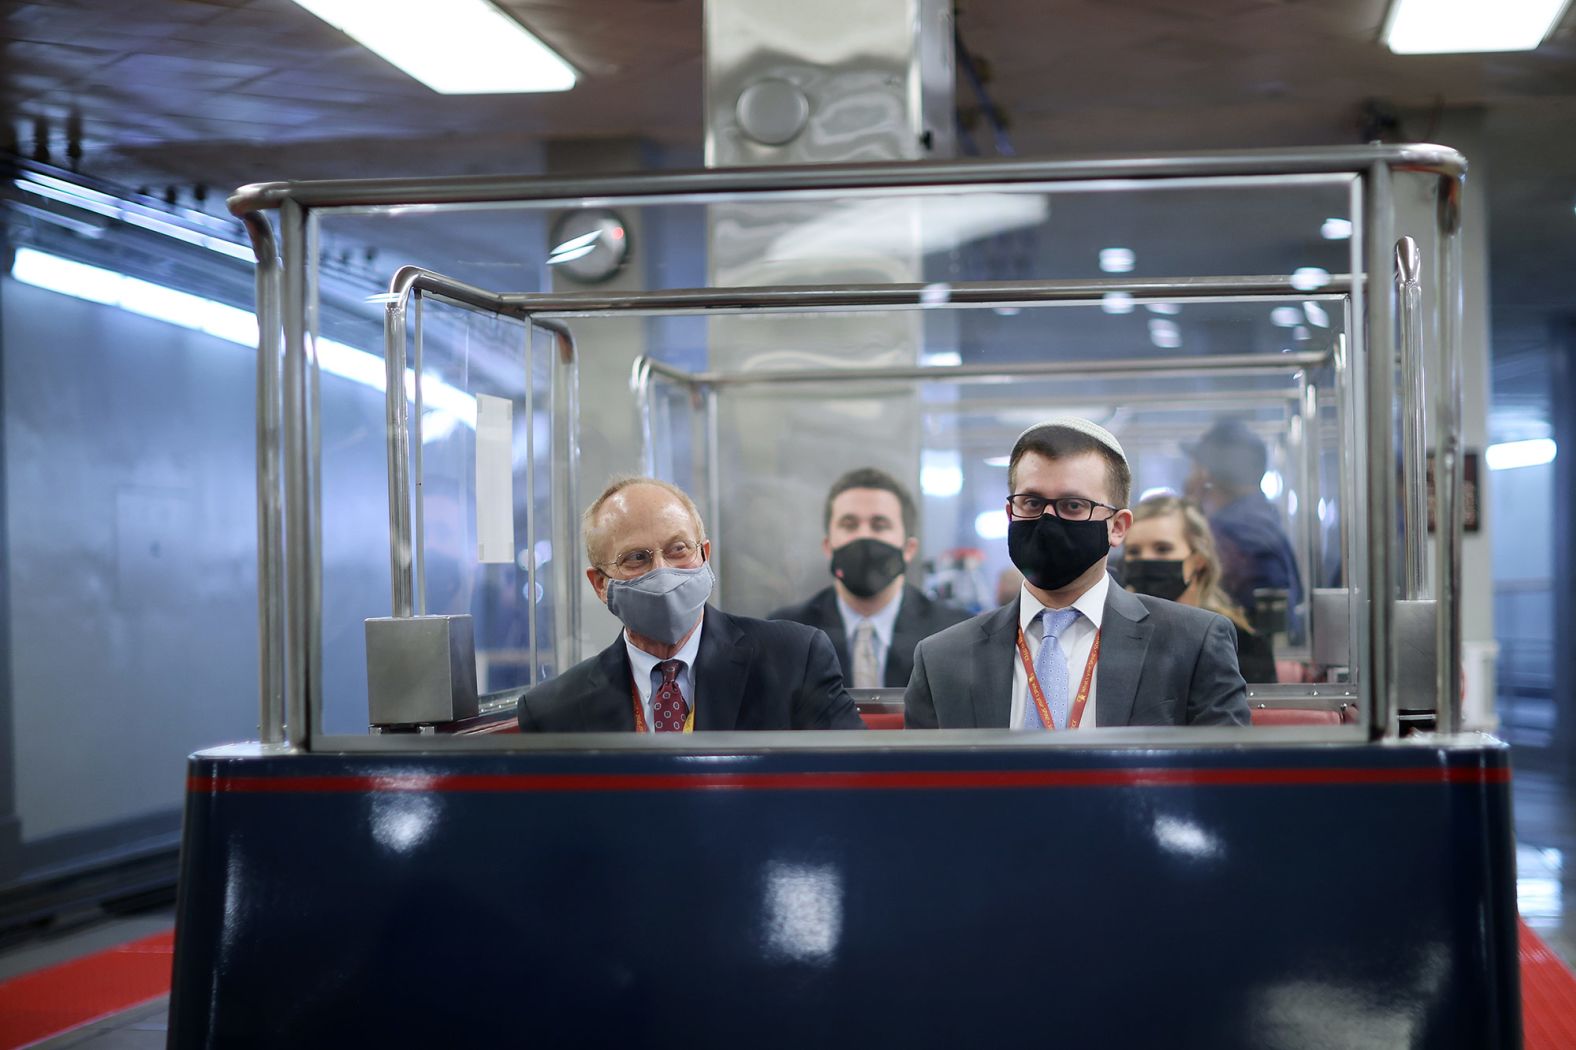 Defense lawyer David Schoen, left, rides a subway train at the Capitol on Thursday.